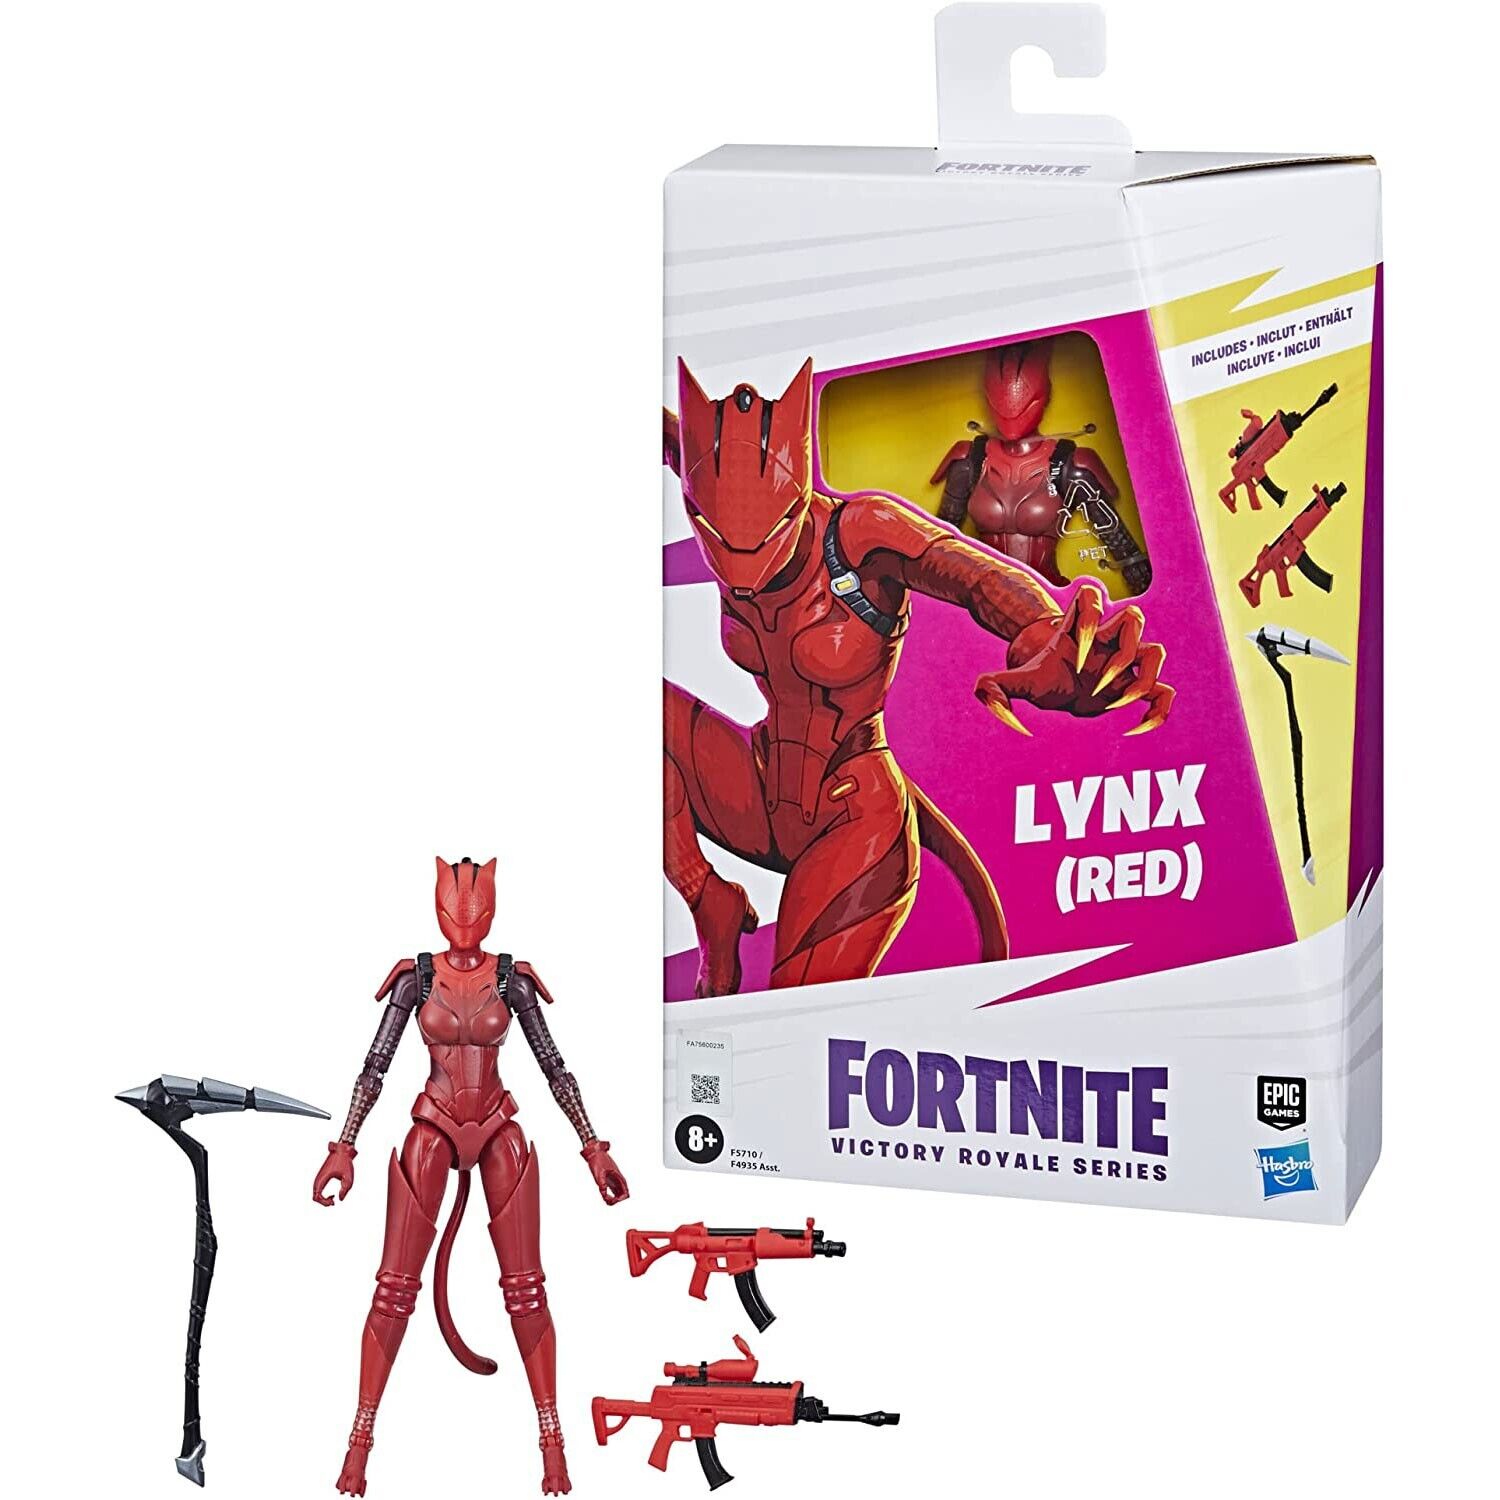 "Fortnite Victory Royale Lynx Red 6" Action Figure - BRAND NEW"